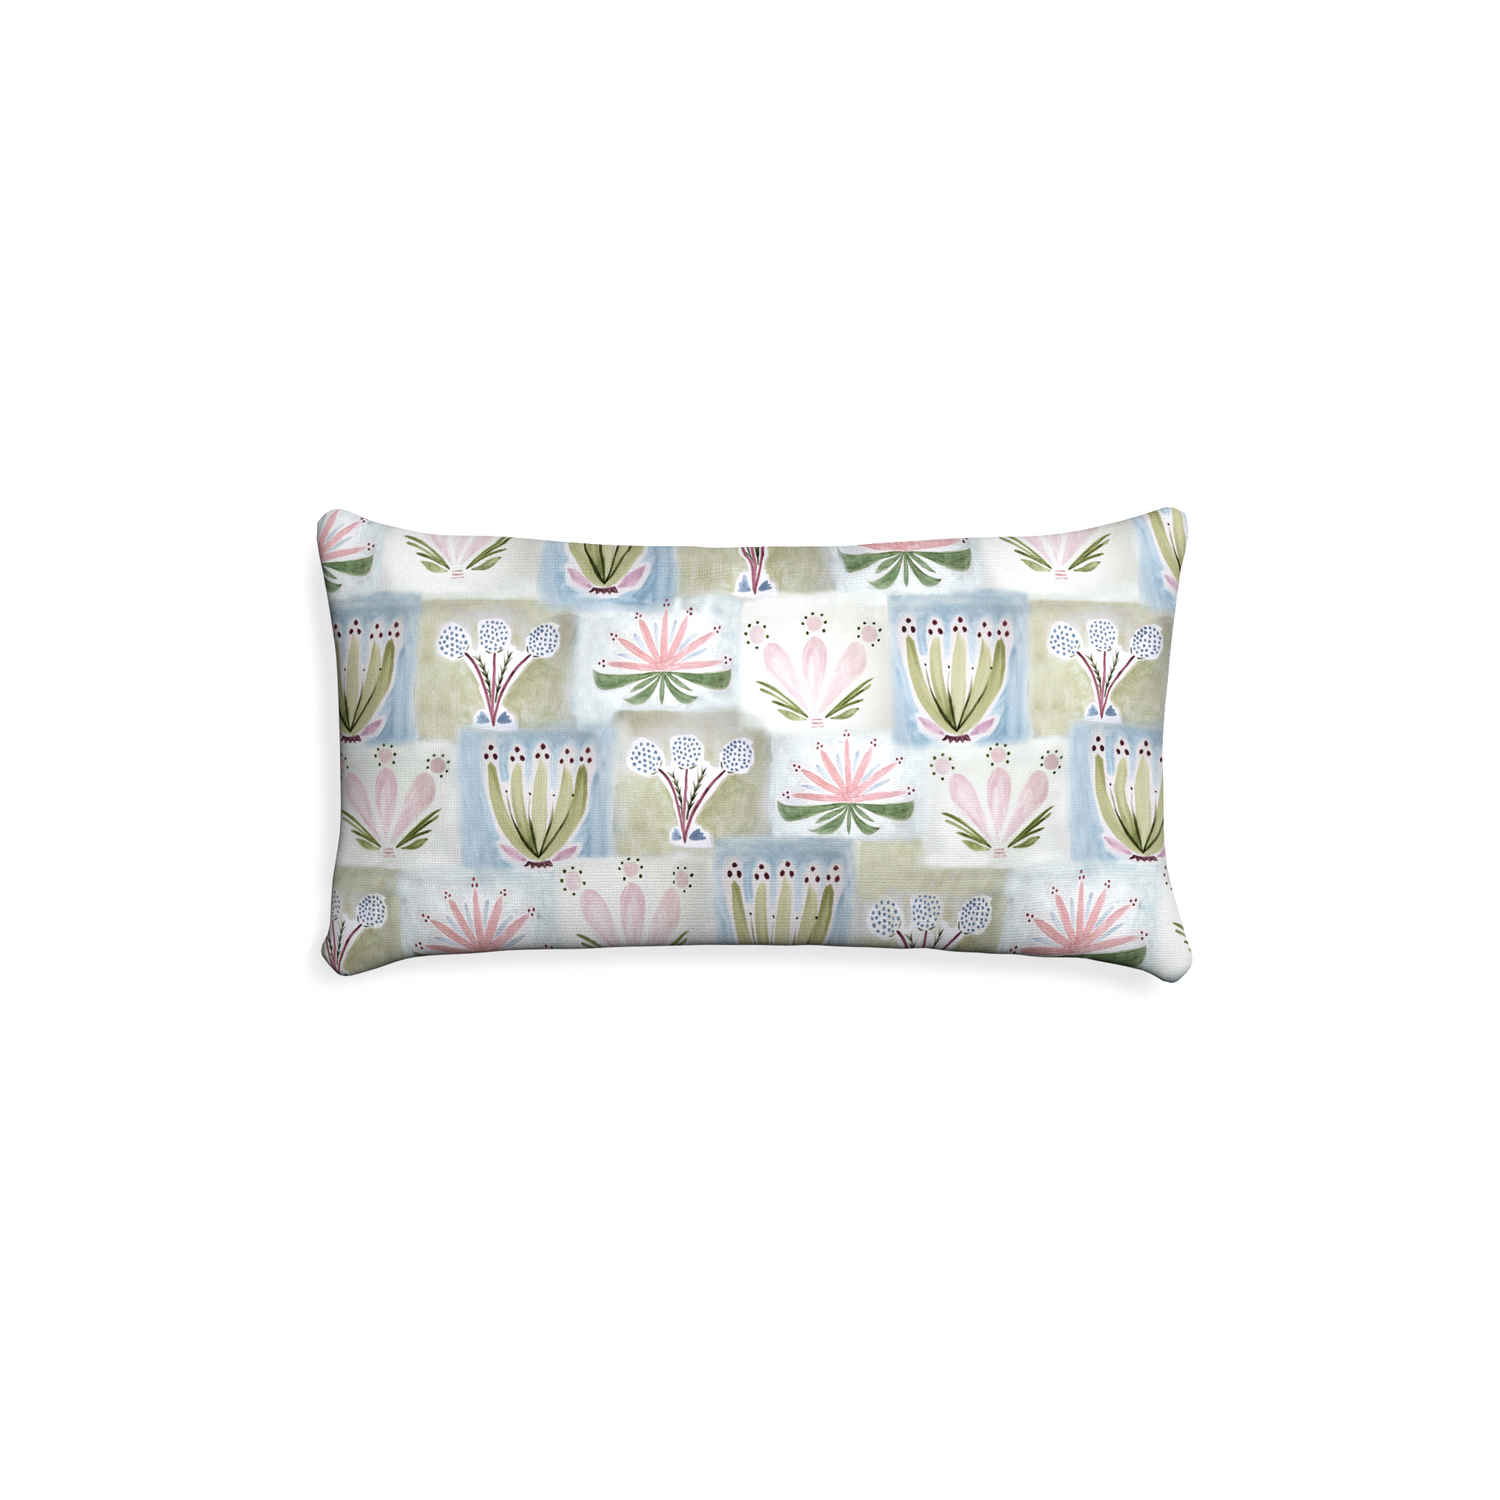 Petite-lumbar harper custom hand-painted floralpillow with none on white background